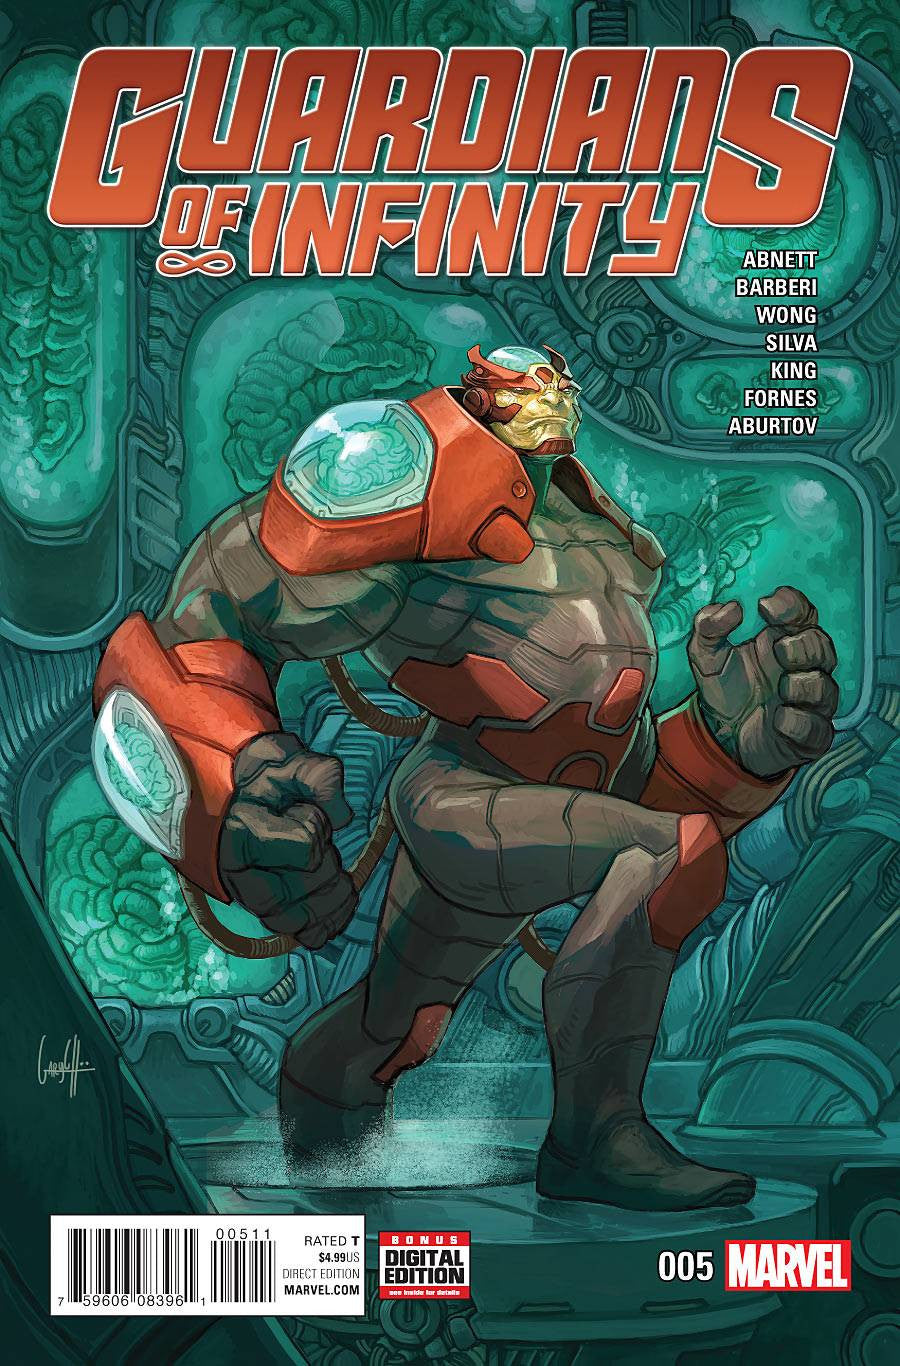 GUARDIANS OF INFINITY #5 COVER